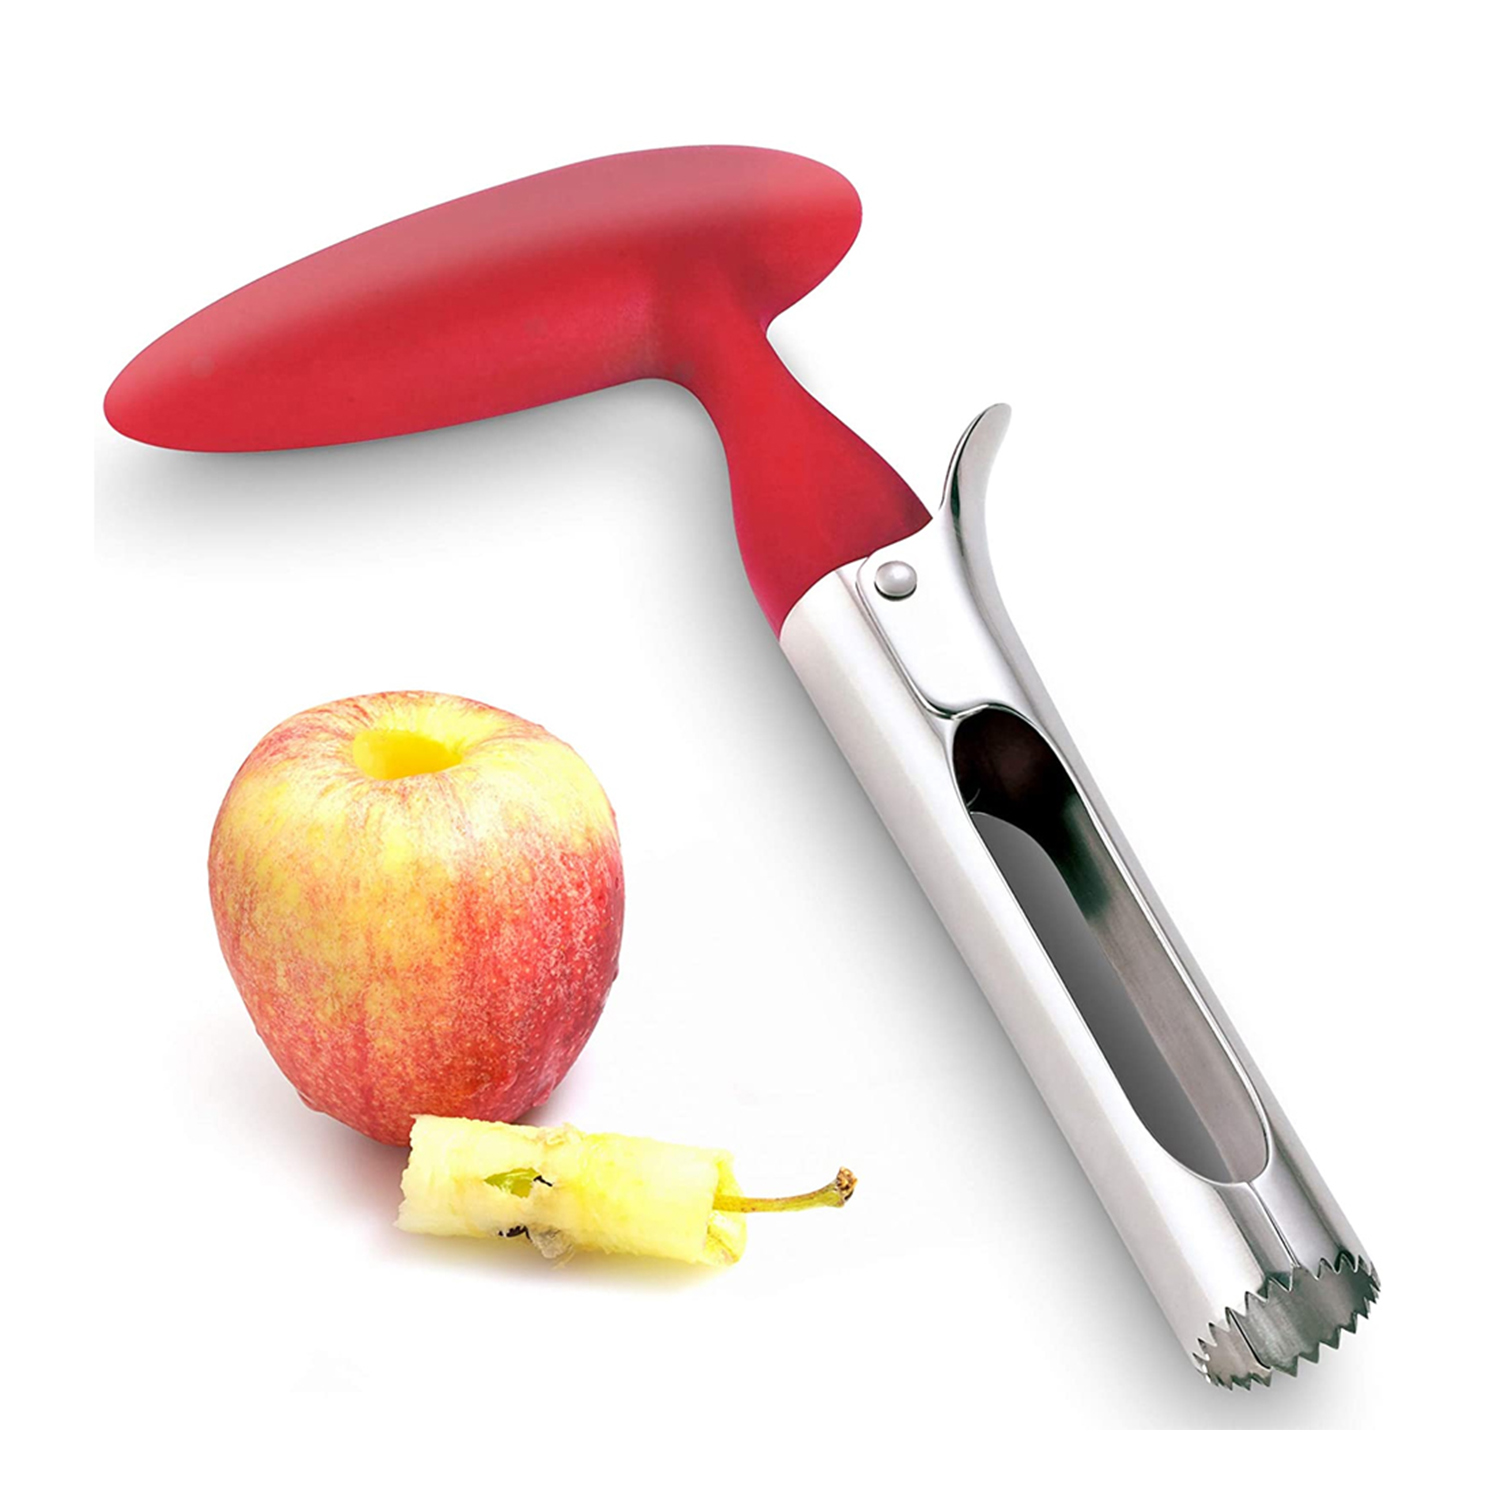 Stainless Steel Premium Apple And Fruit Corer Remover - image 1 of 6